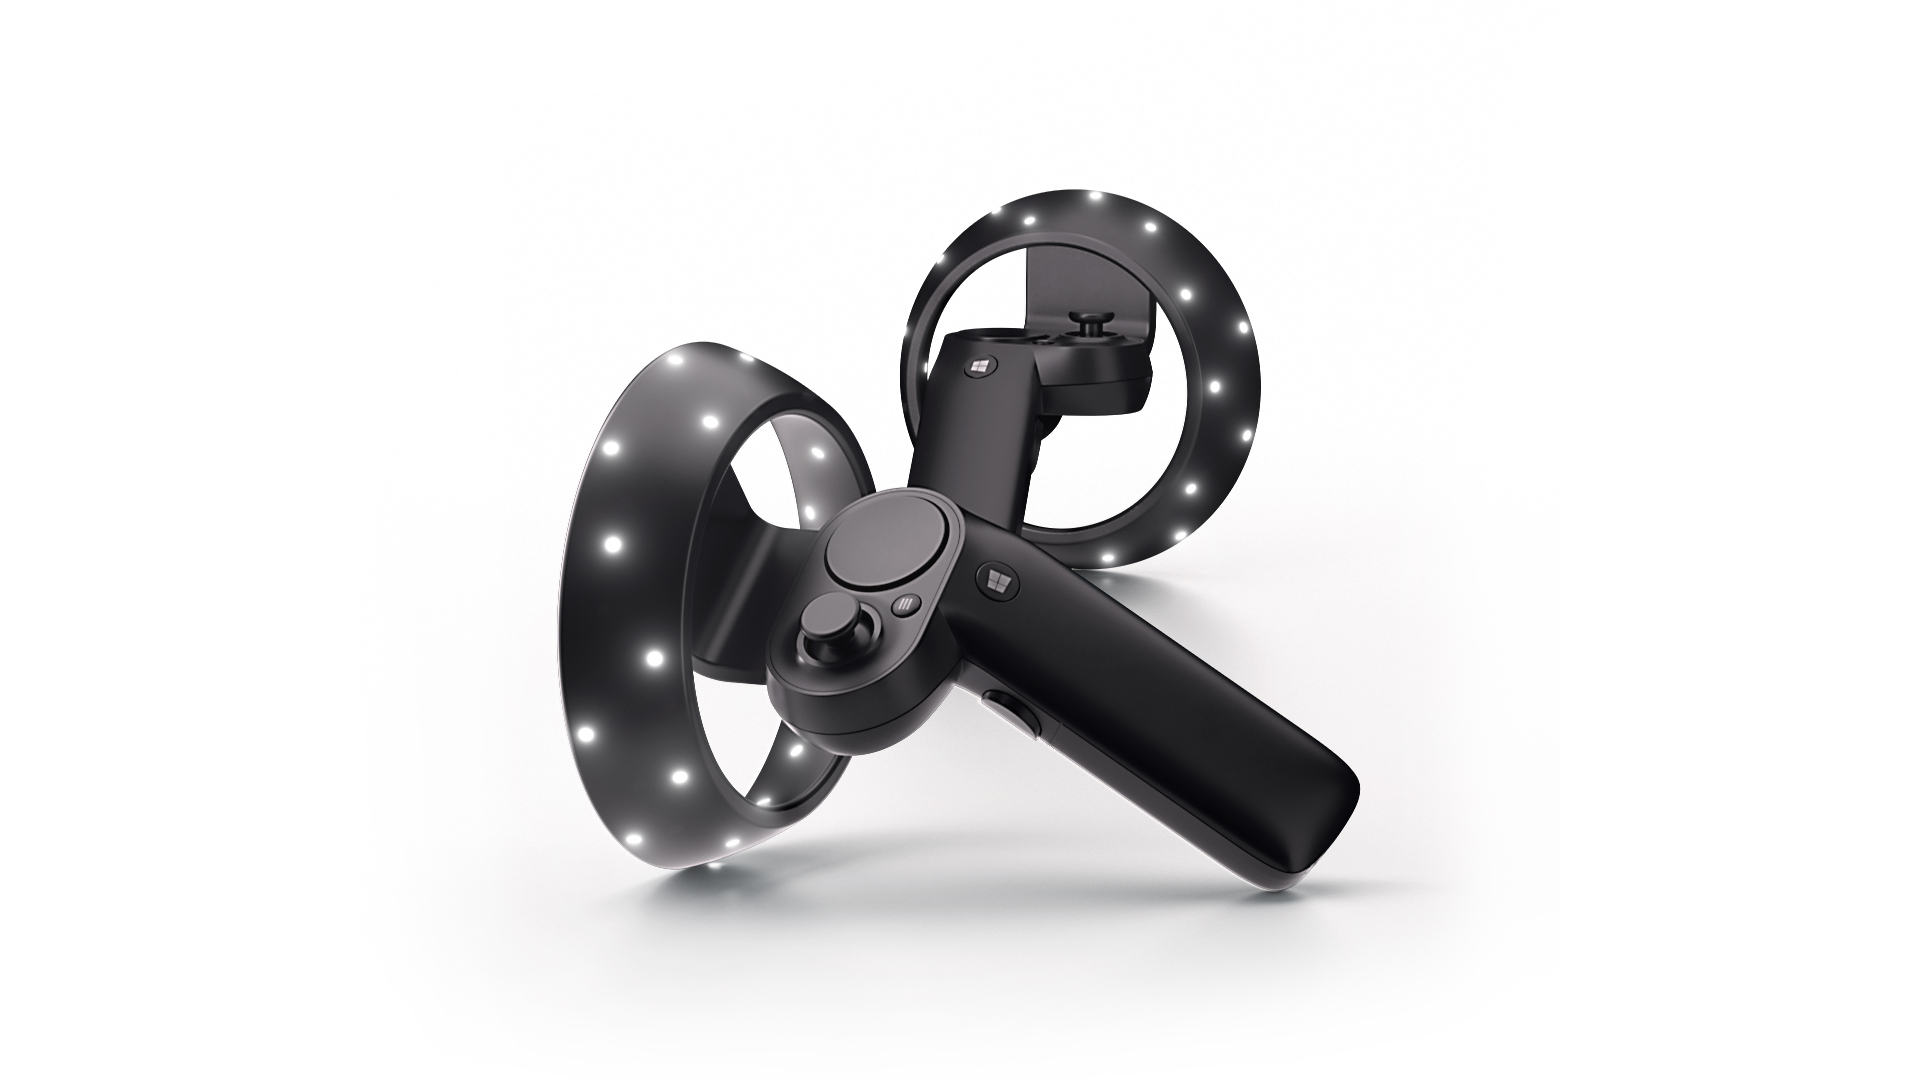 Microsoft's Windows Mixed Reality controllers